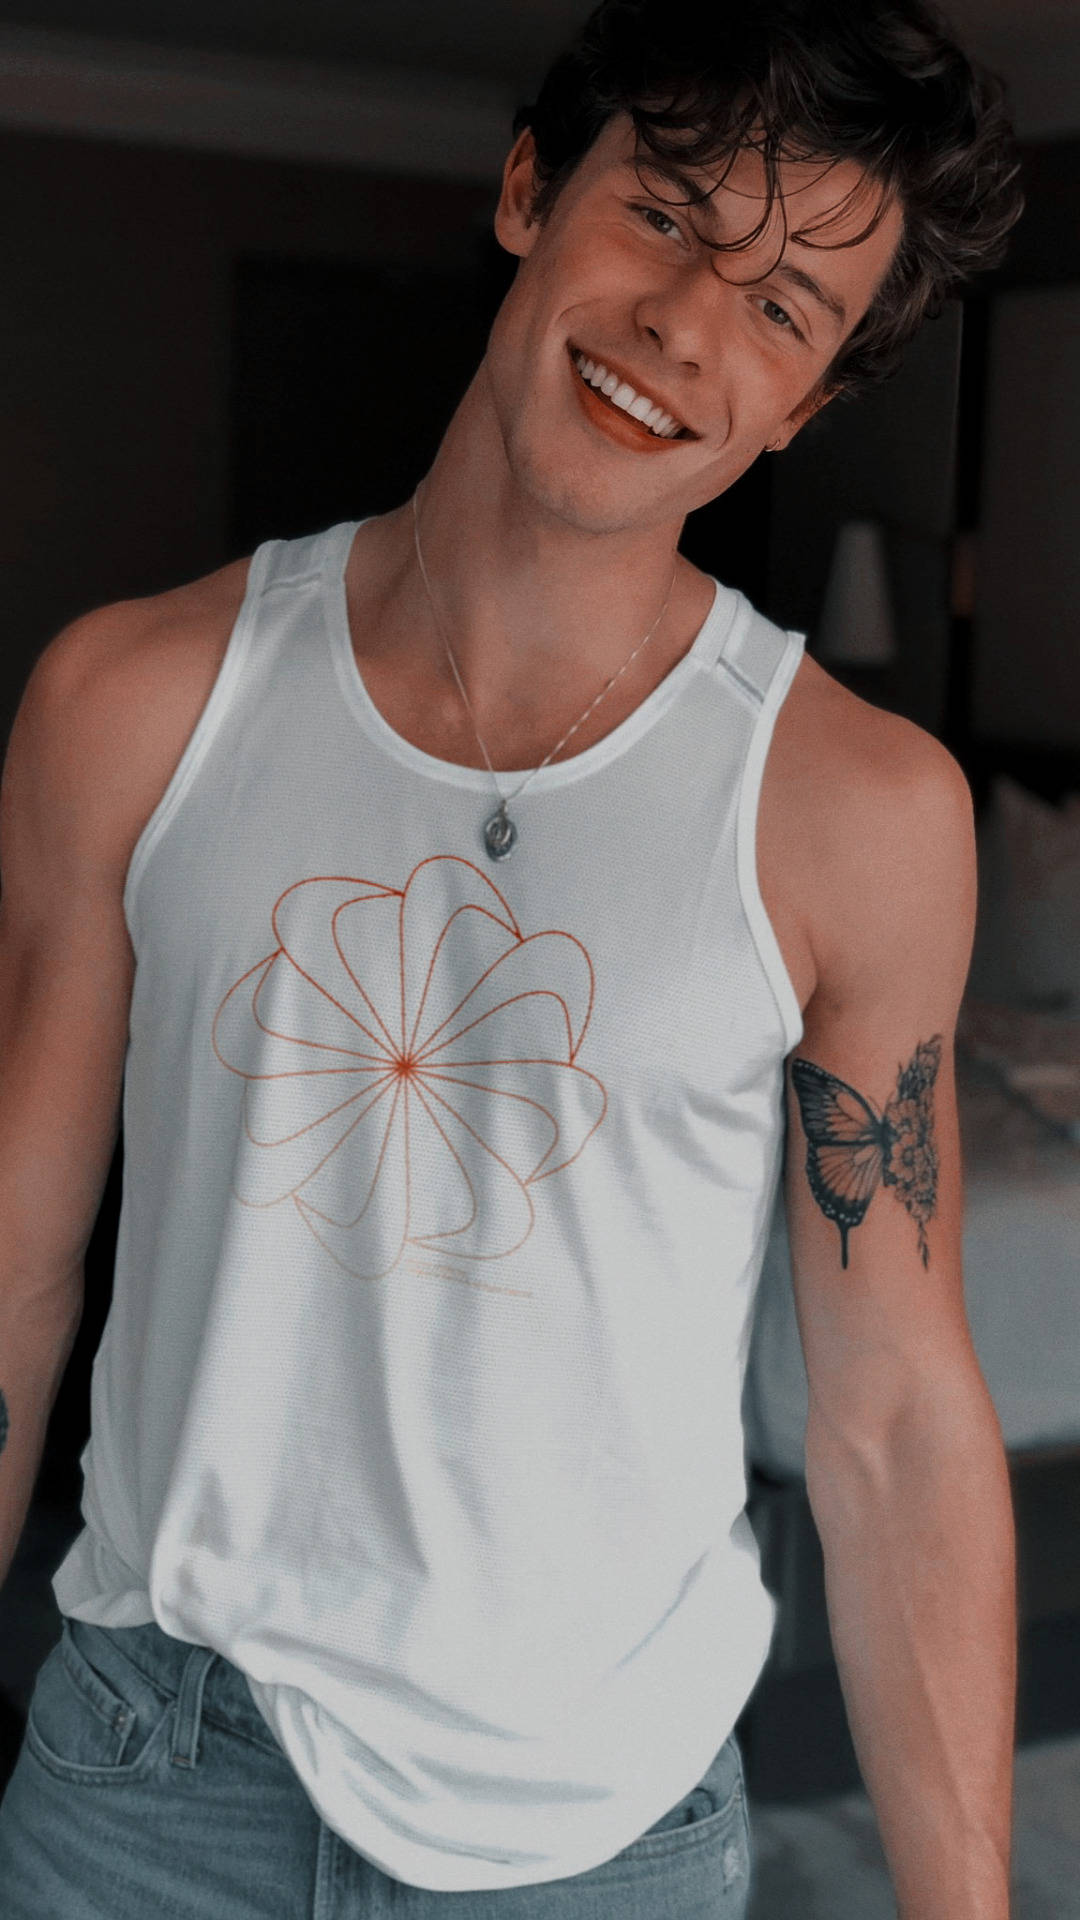 Shawn Mendes Tattoo Background